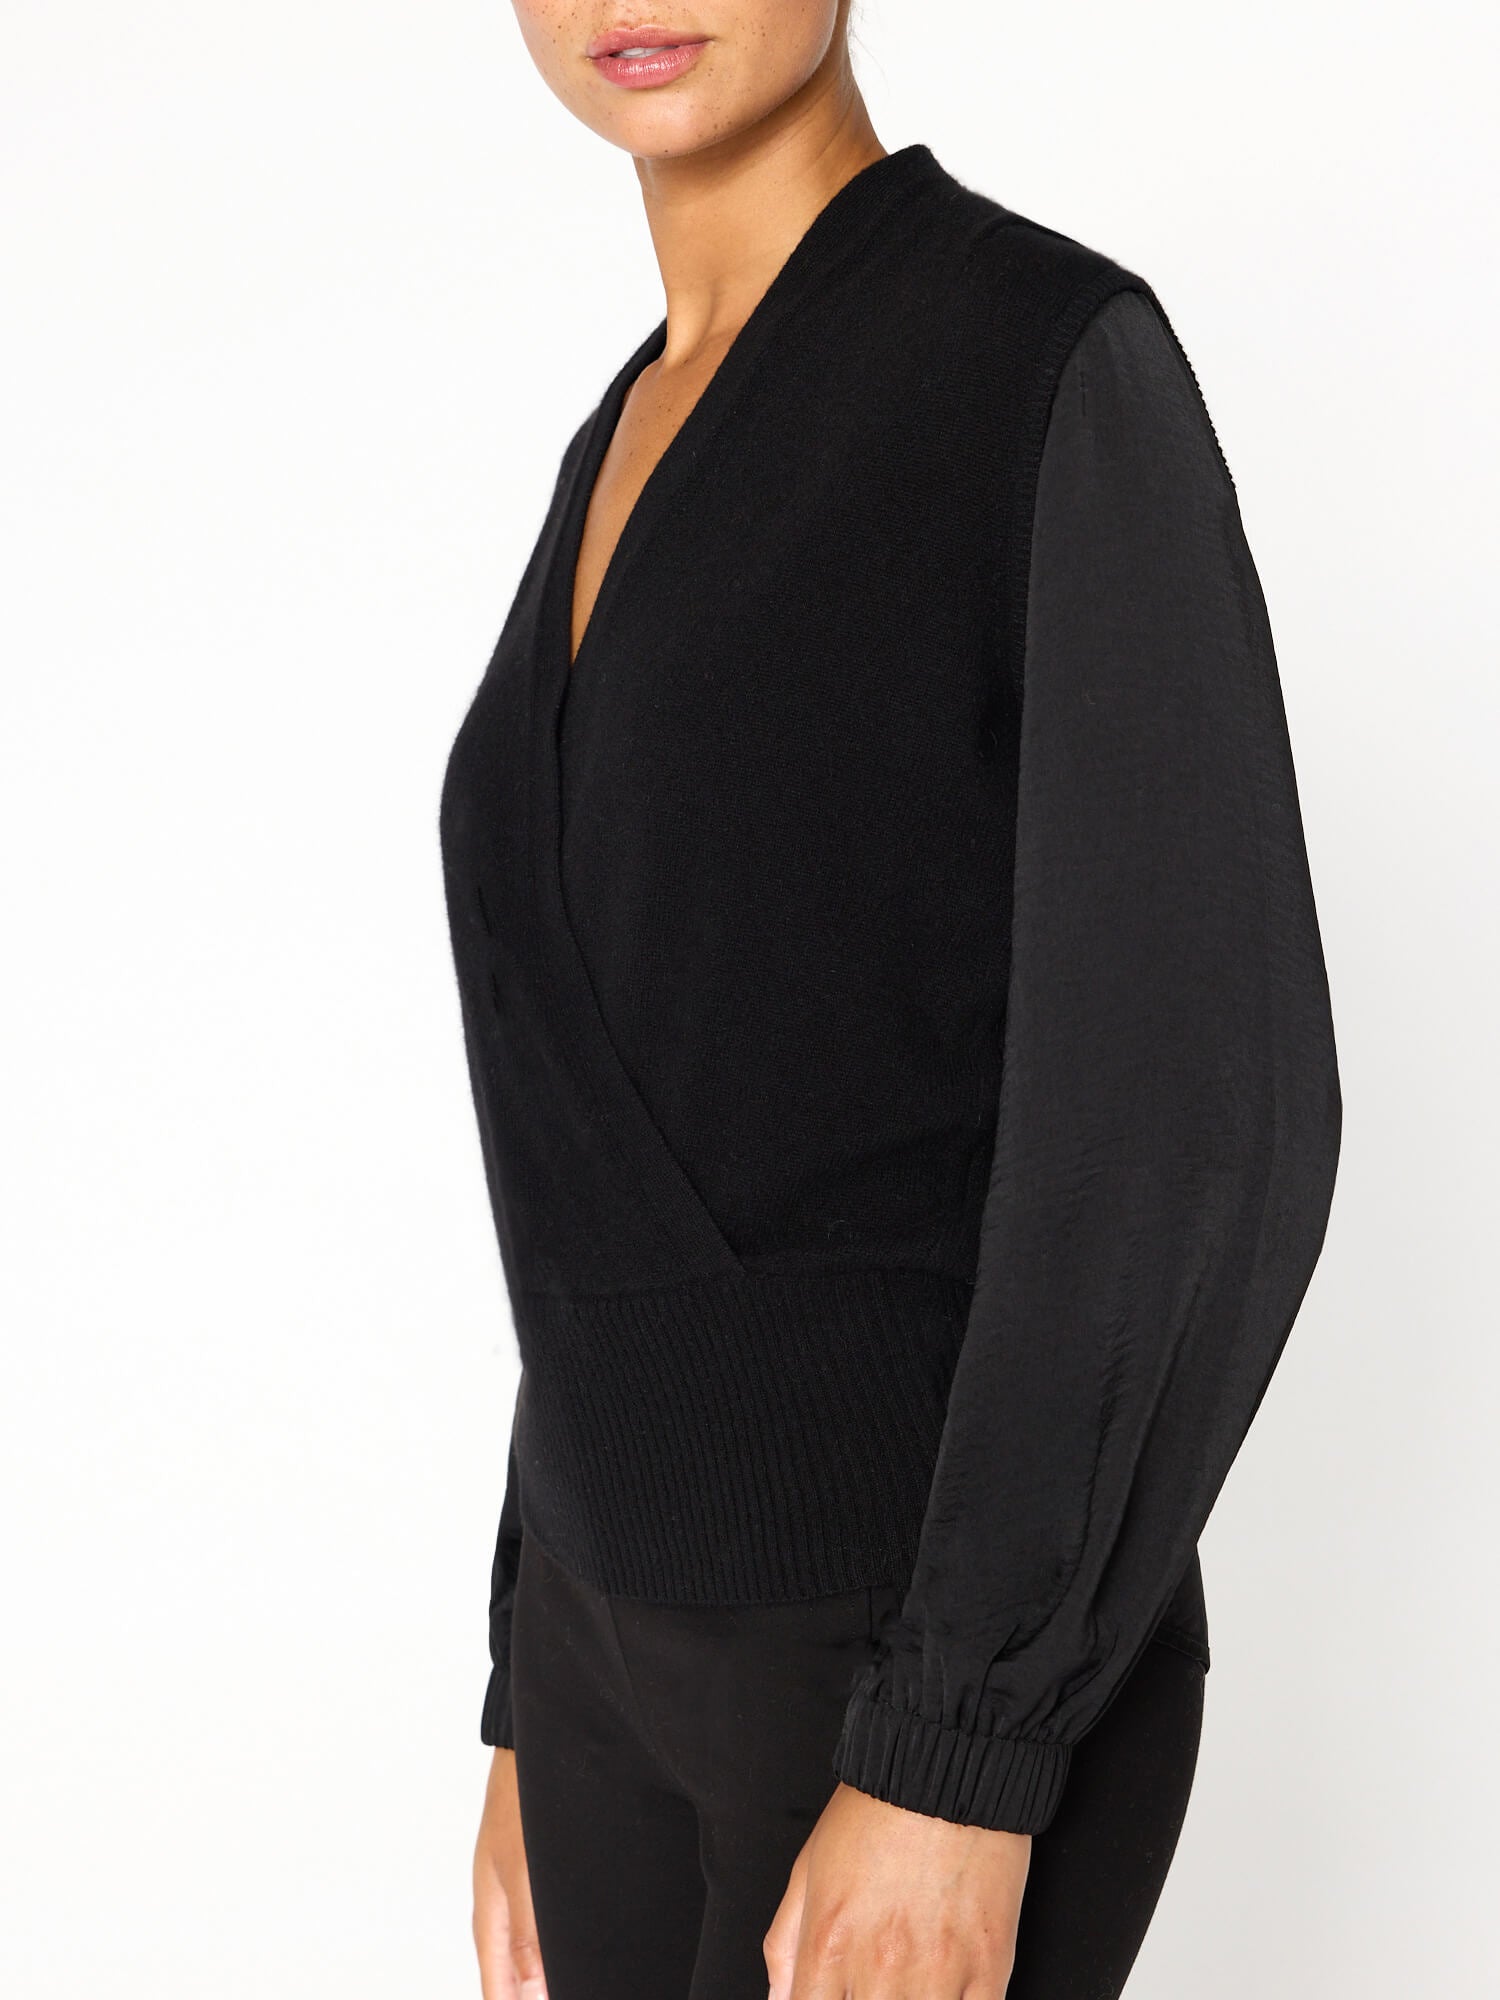 Phinneas black layered woven and knit sweater side view